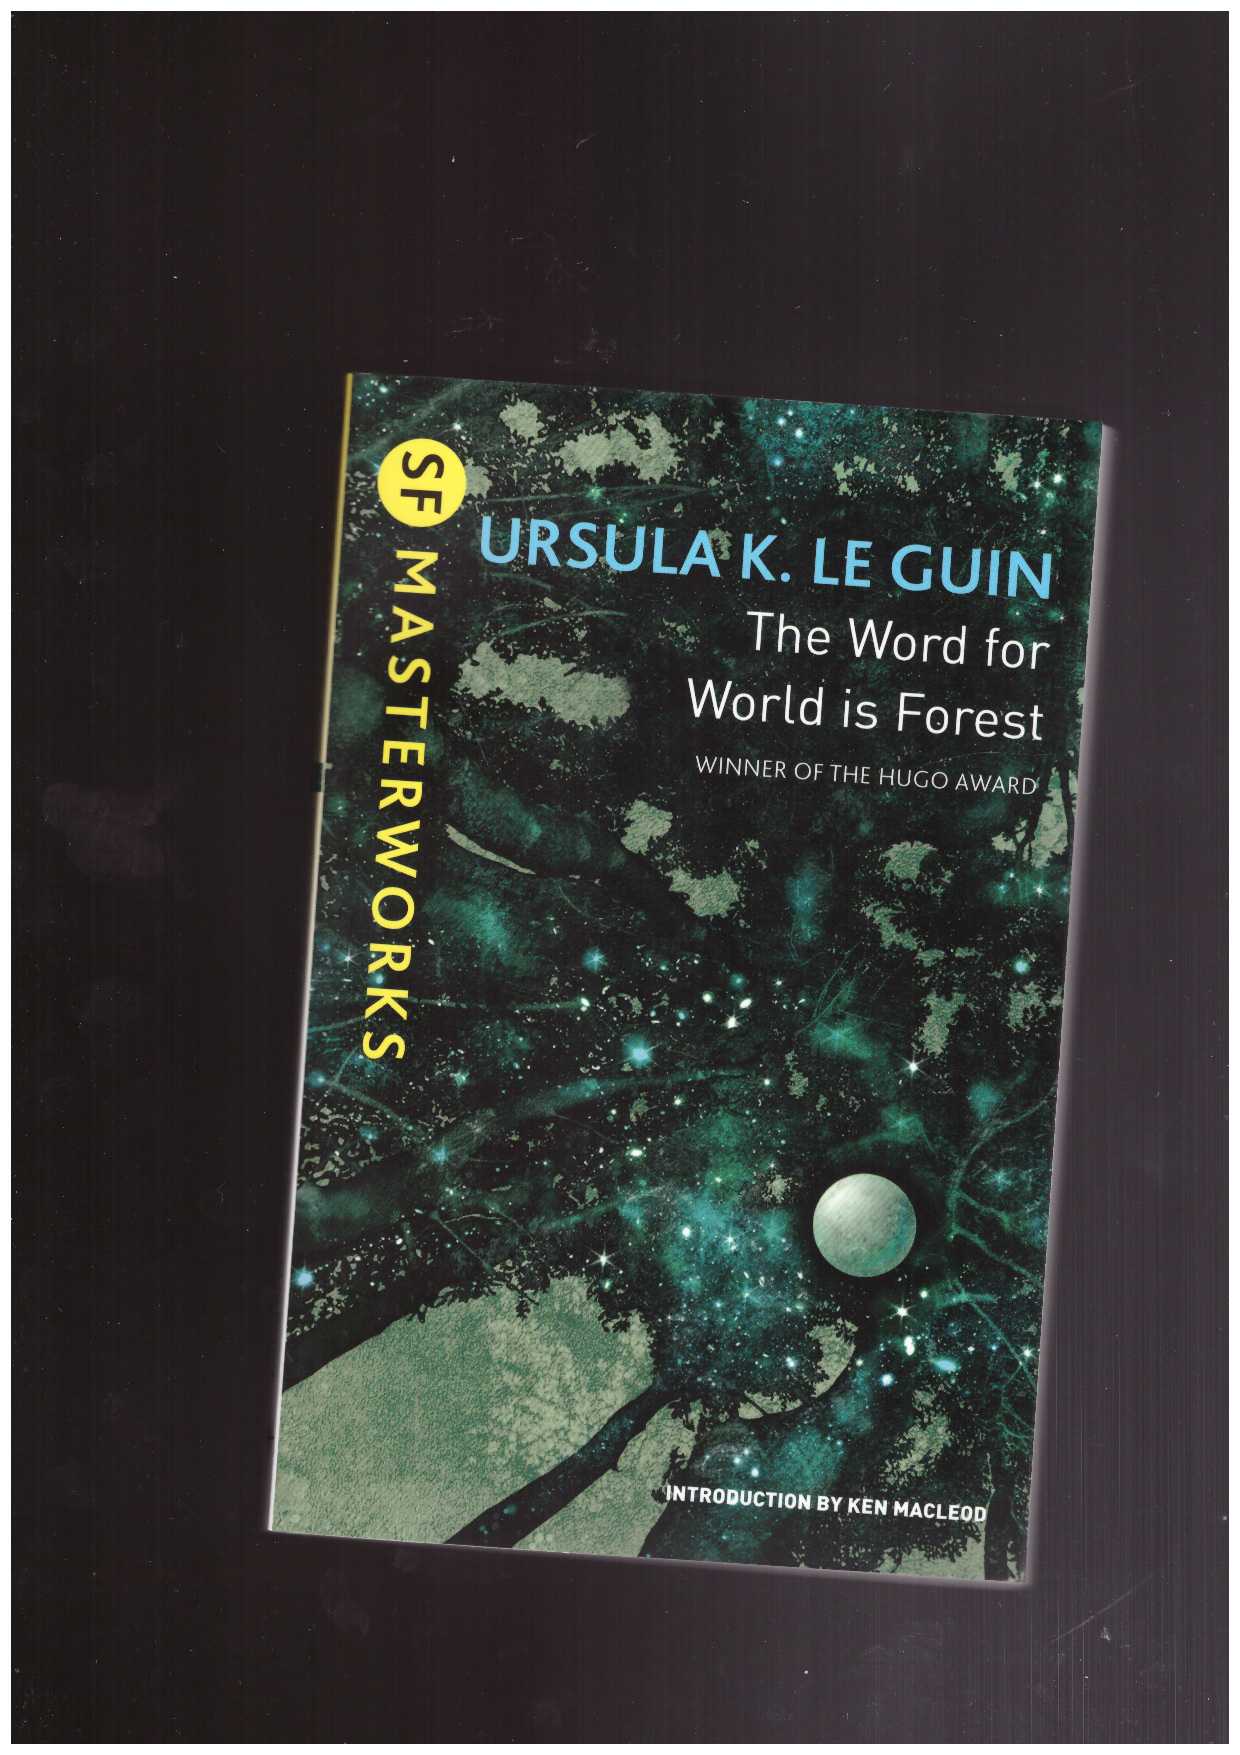 LE GUIN, Ursula K. - The Word for World is Forest